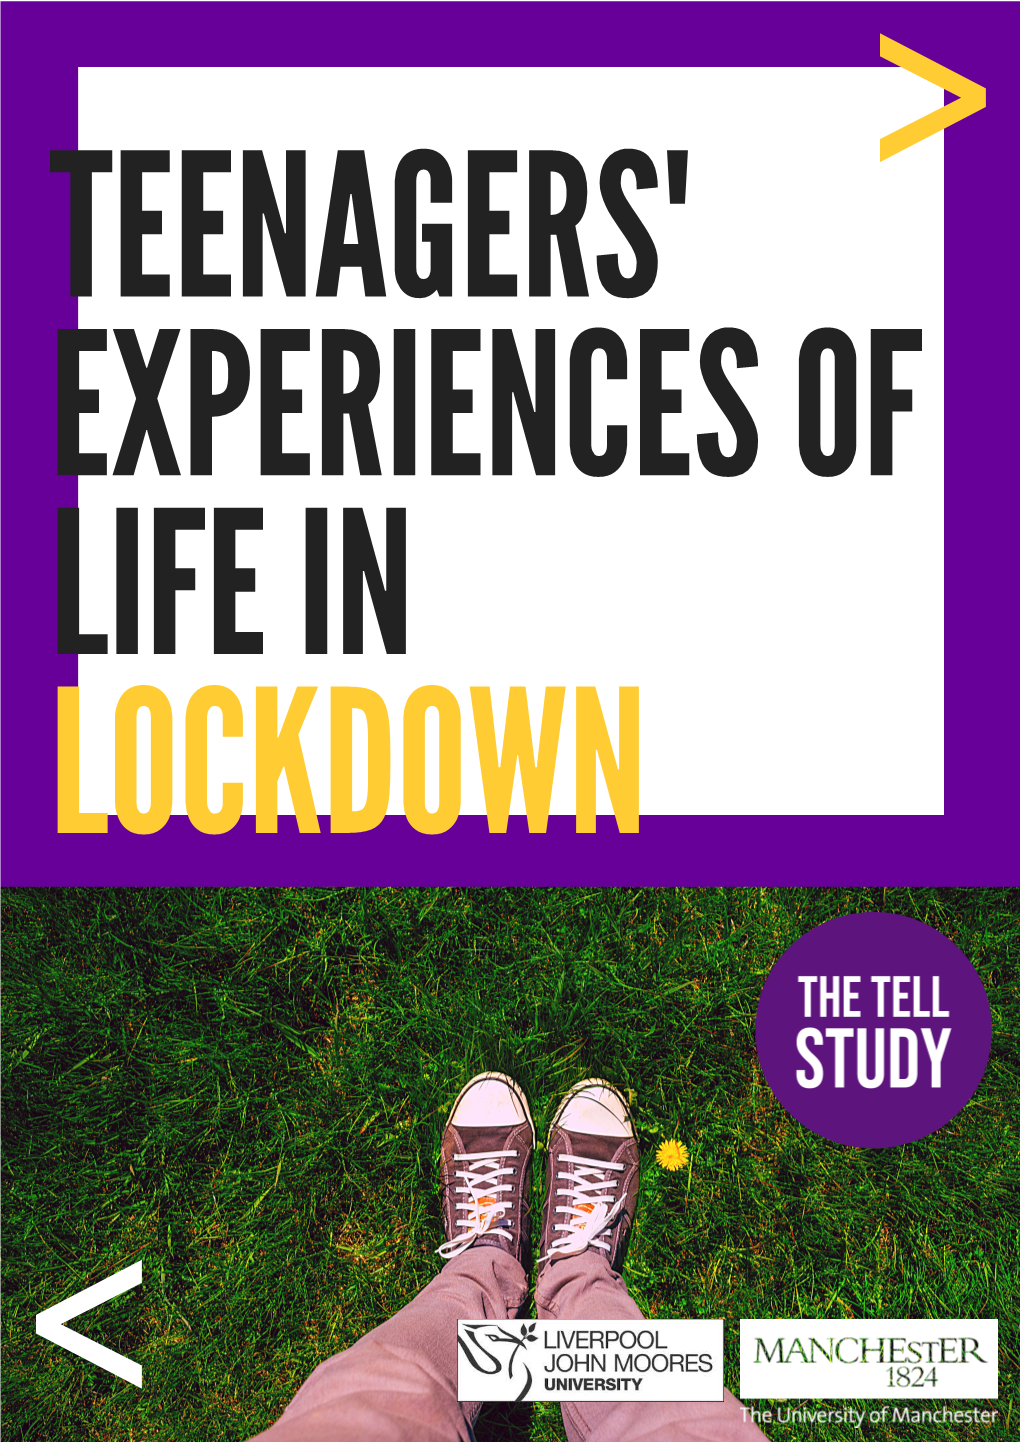 The TELL Study Is a Rapid Research Project Aiming to Learn More About The> Perspectives and Experiences of 16-To 19-Year-Olds in the COVID-19 UK Lockdown